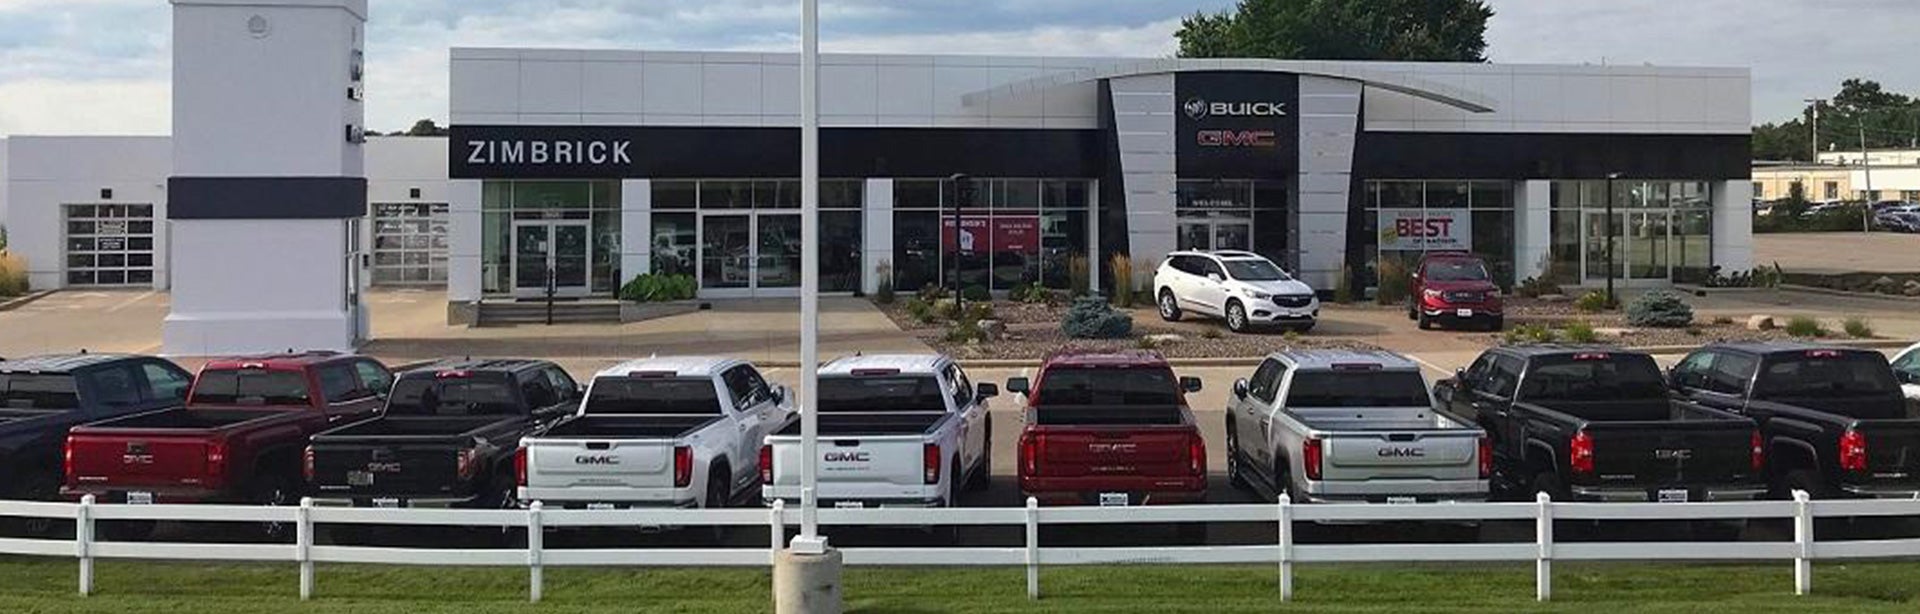 WELCOME TO ZIMBRICK BUICK/GMC WEST